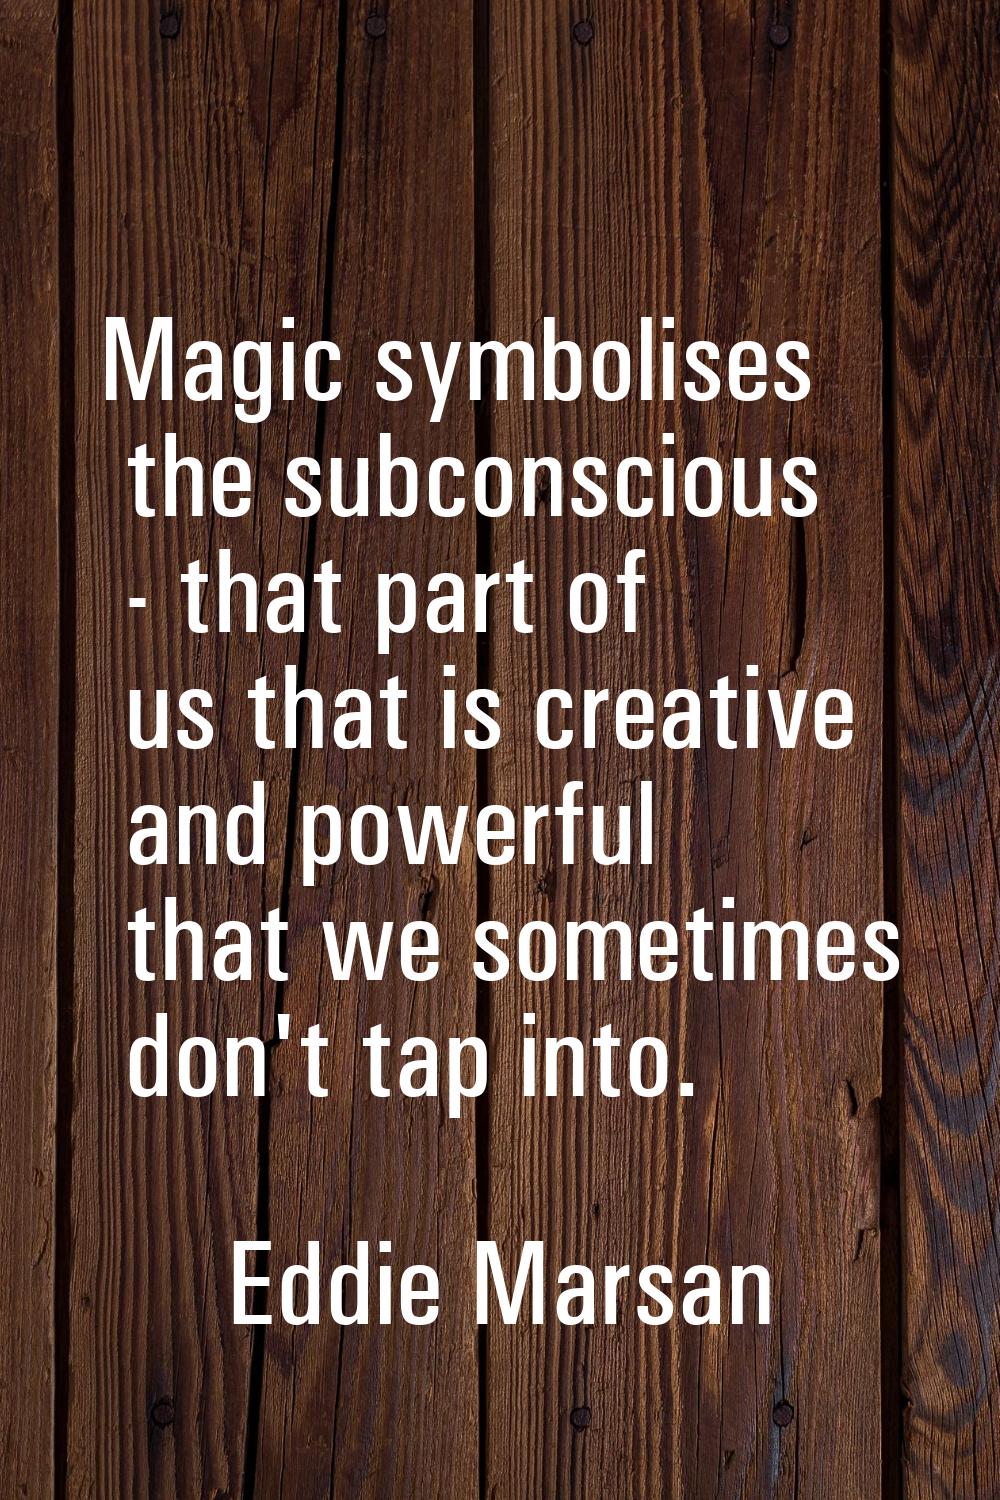 Magic symbolises the subconscious - that part of us that is creative and powerful that we sometimes